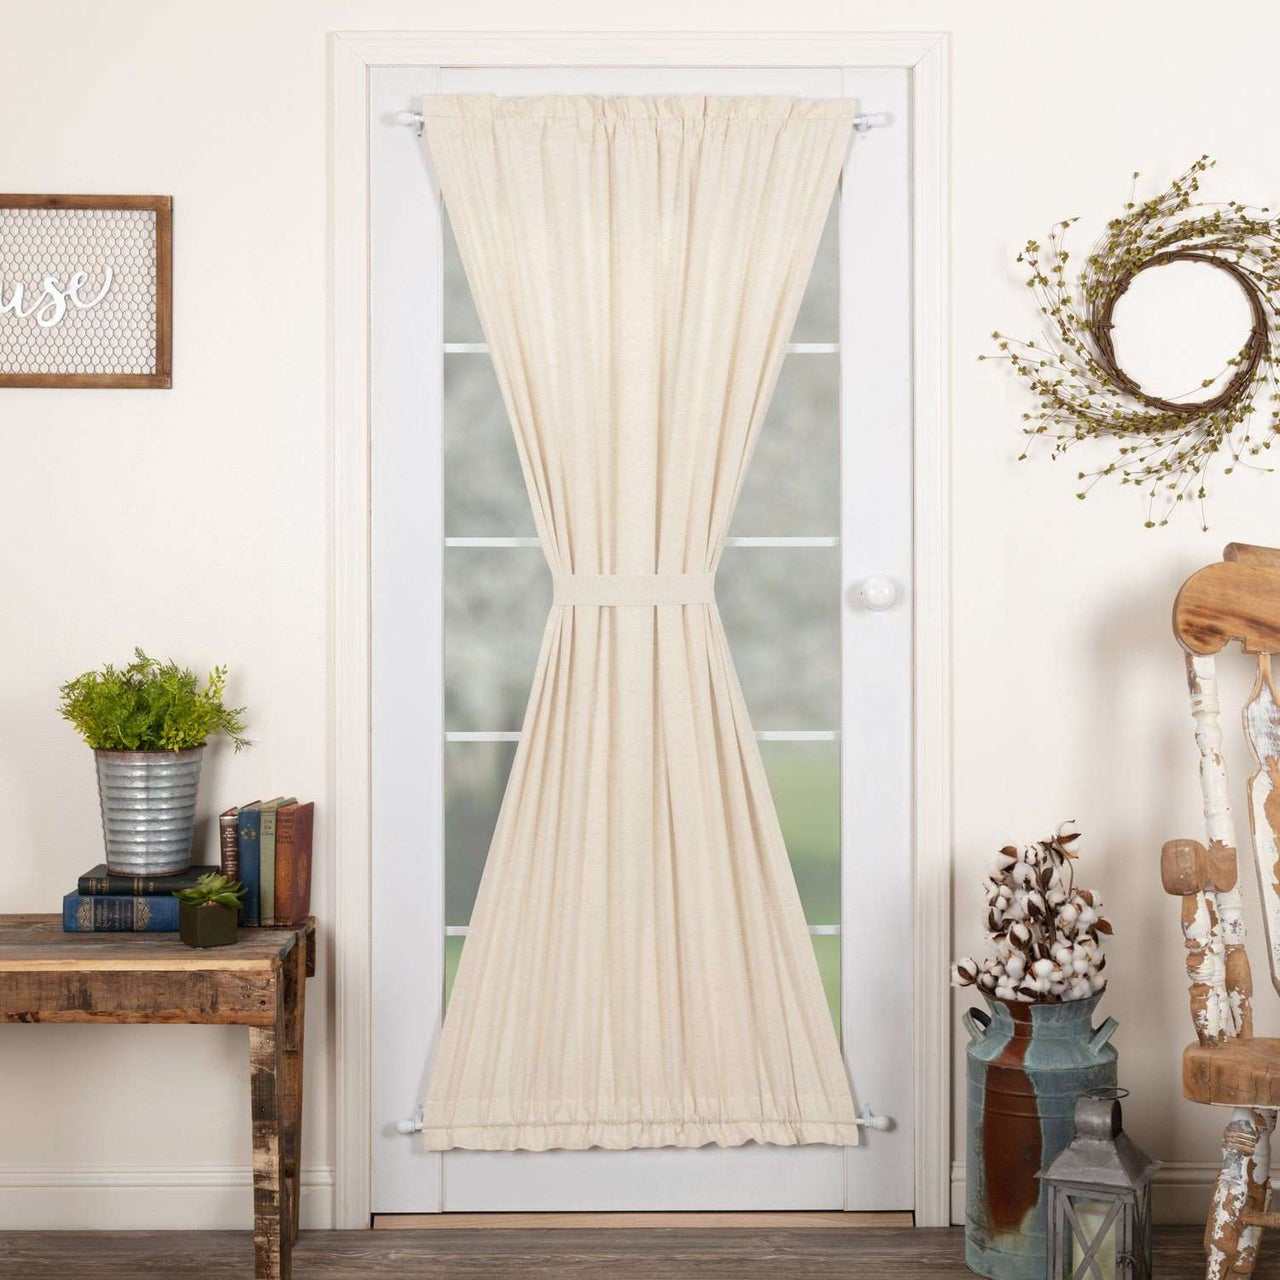 Simple Life Flax Khaki/Antique White/Natural Door Panel 72"x40" curtain VHC Brands 